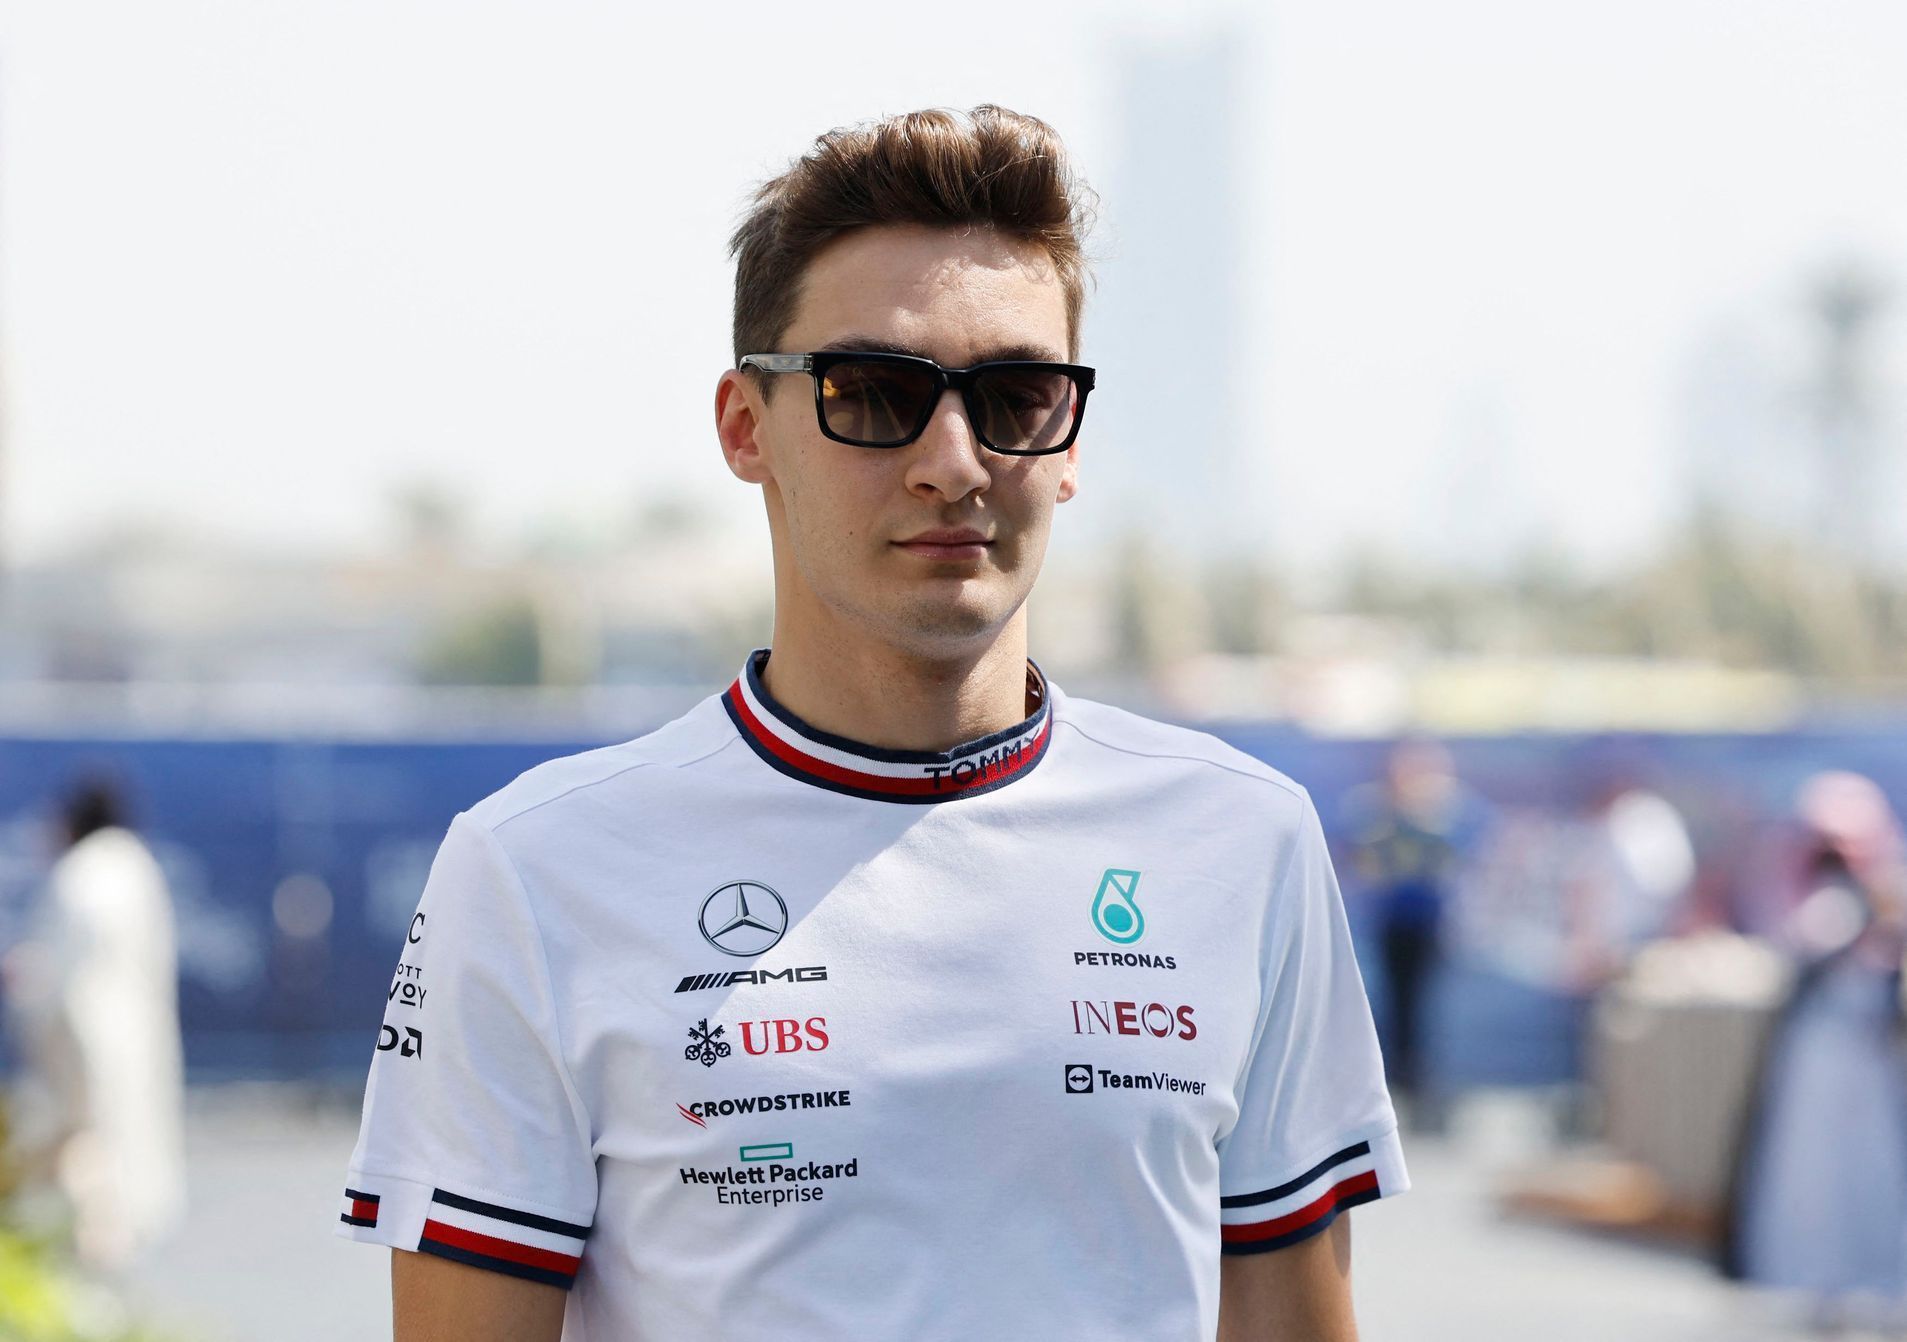 Pilot F1 George Russell, Mercedes (2022)